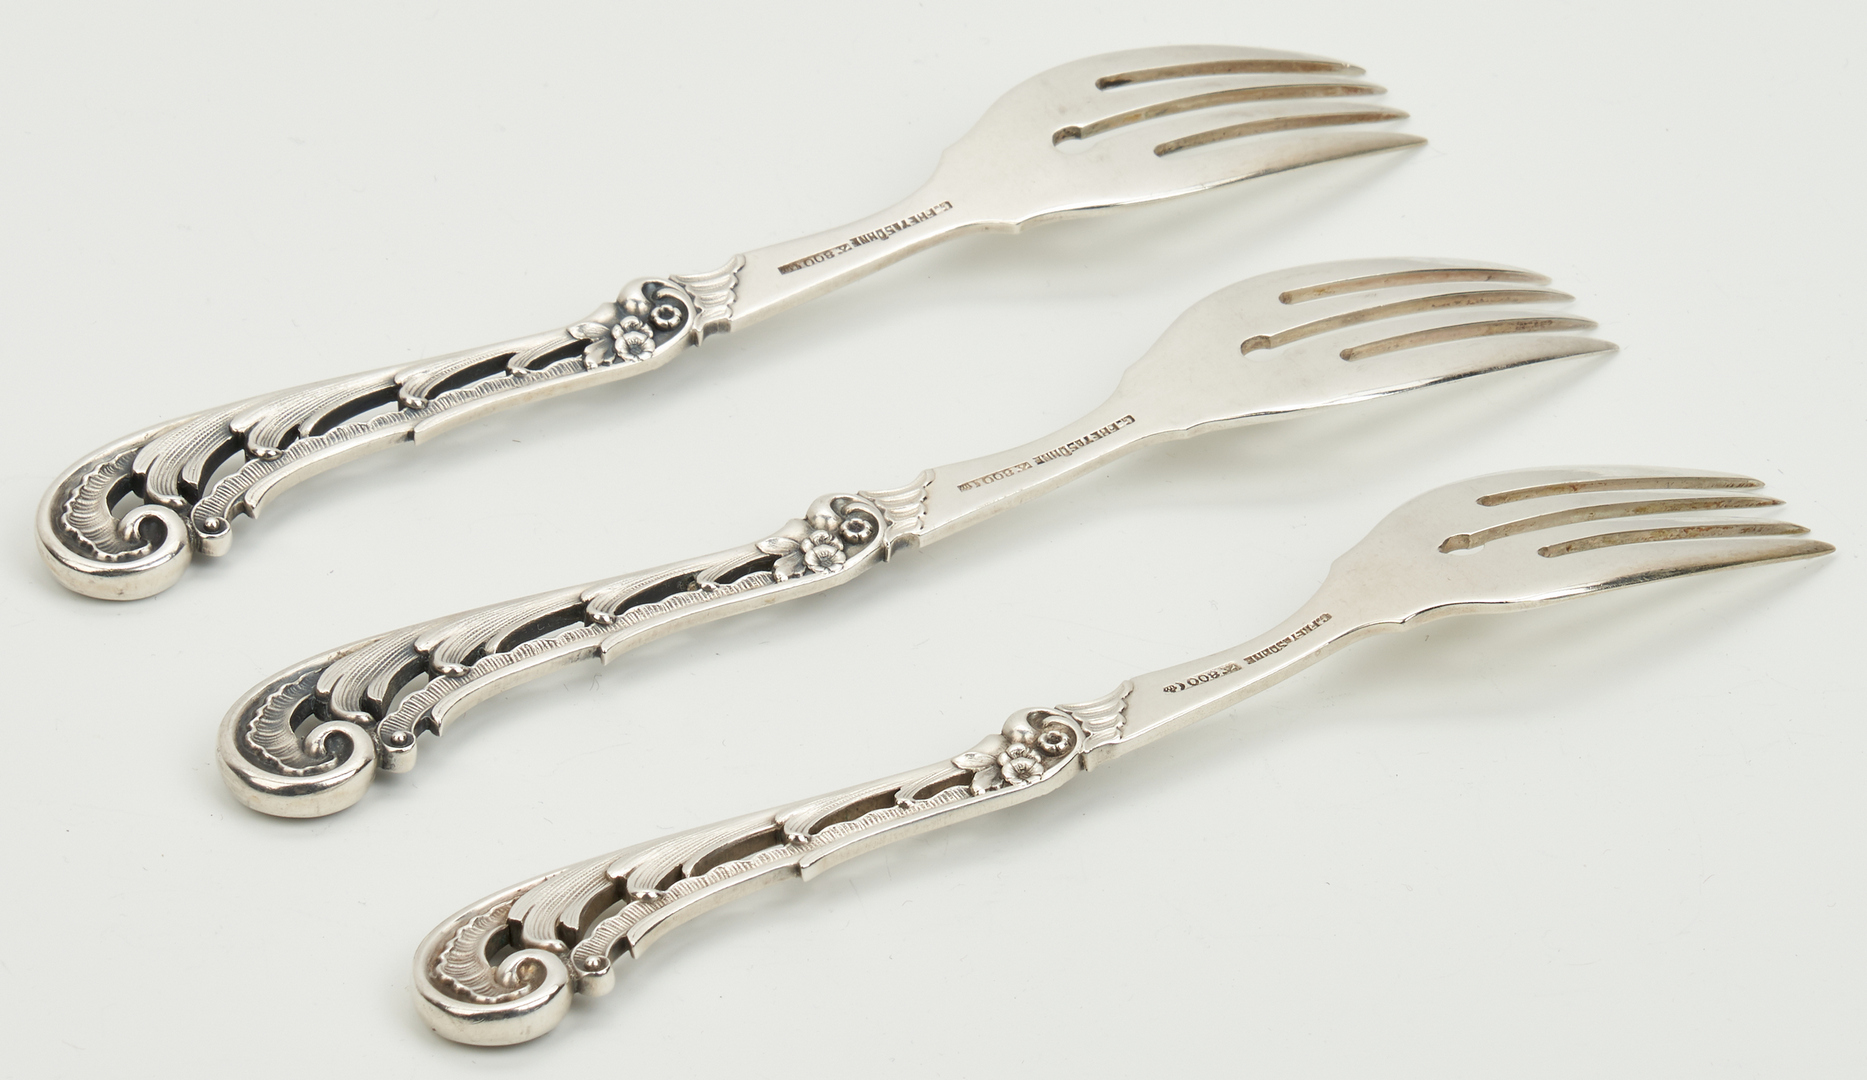 Lot 787: Carl Frey & Sohne Silver Fish Forks and Knives